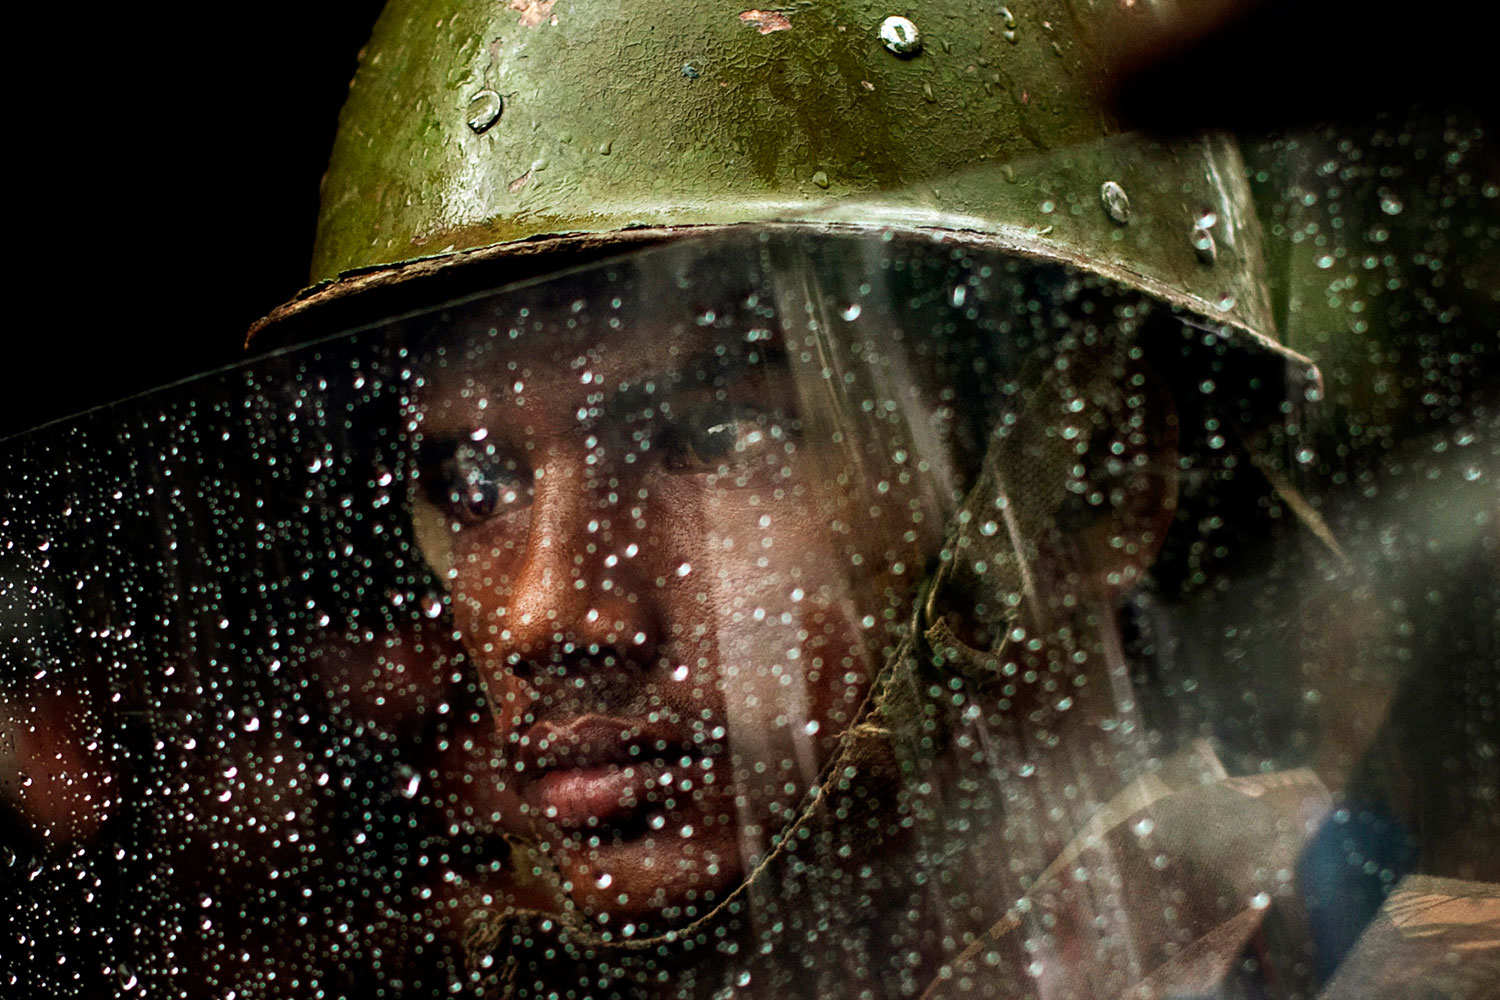 August 11, 2011. An Indian police officer looks from behind his rain covered shield during a monsoon rain shower as he and others stand guard at a protest by the main opposition Bharatiya Janata Party in New Delhi, India. According to local news reports , India's monsoon rain index rose nearly 14 percent in the last week, an increase over the previous period where rain levels were down.